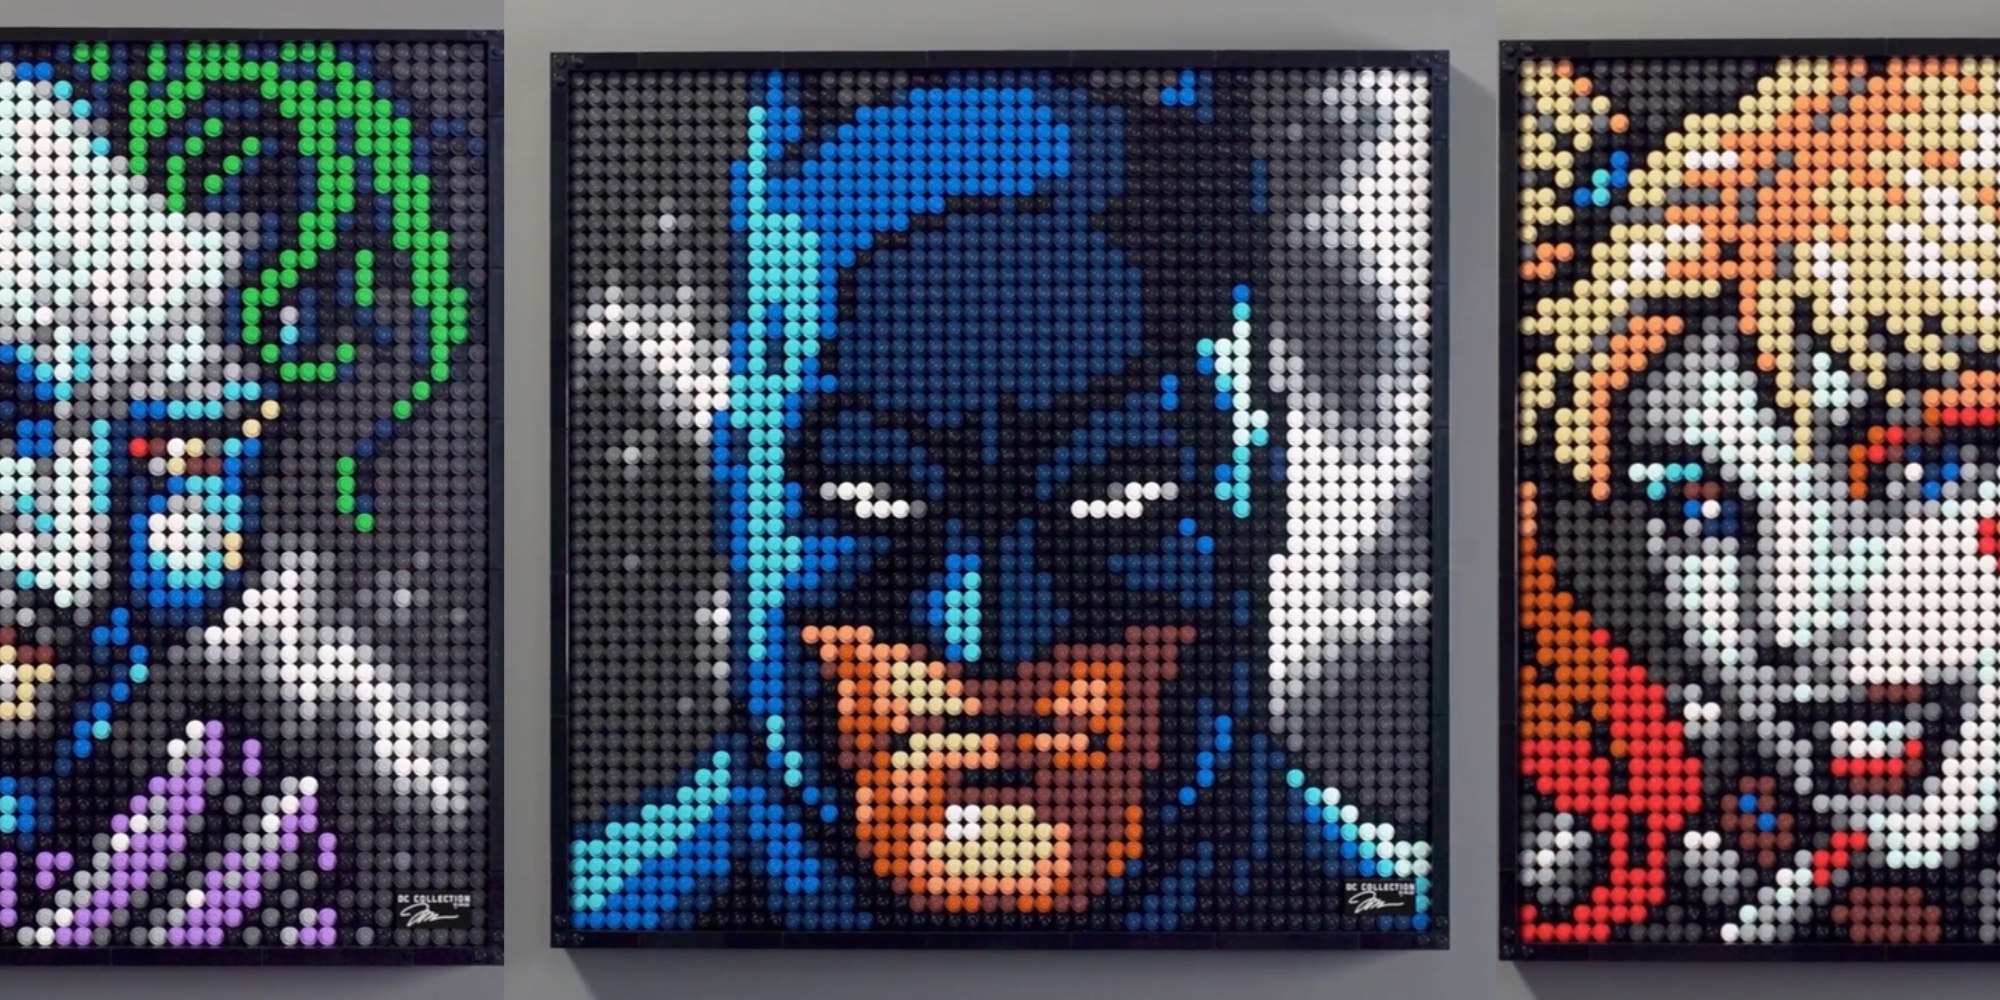 LEGO Batman Art mosaic unveiled with over 4,100 pieces - 9to5Toys